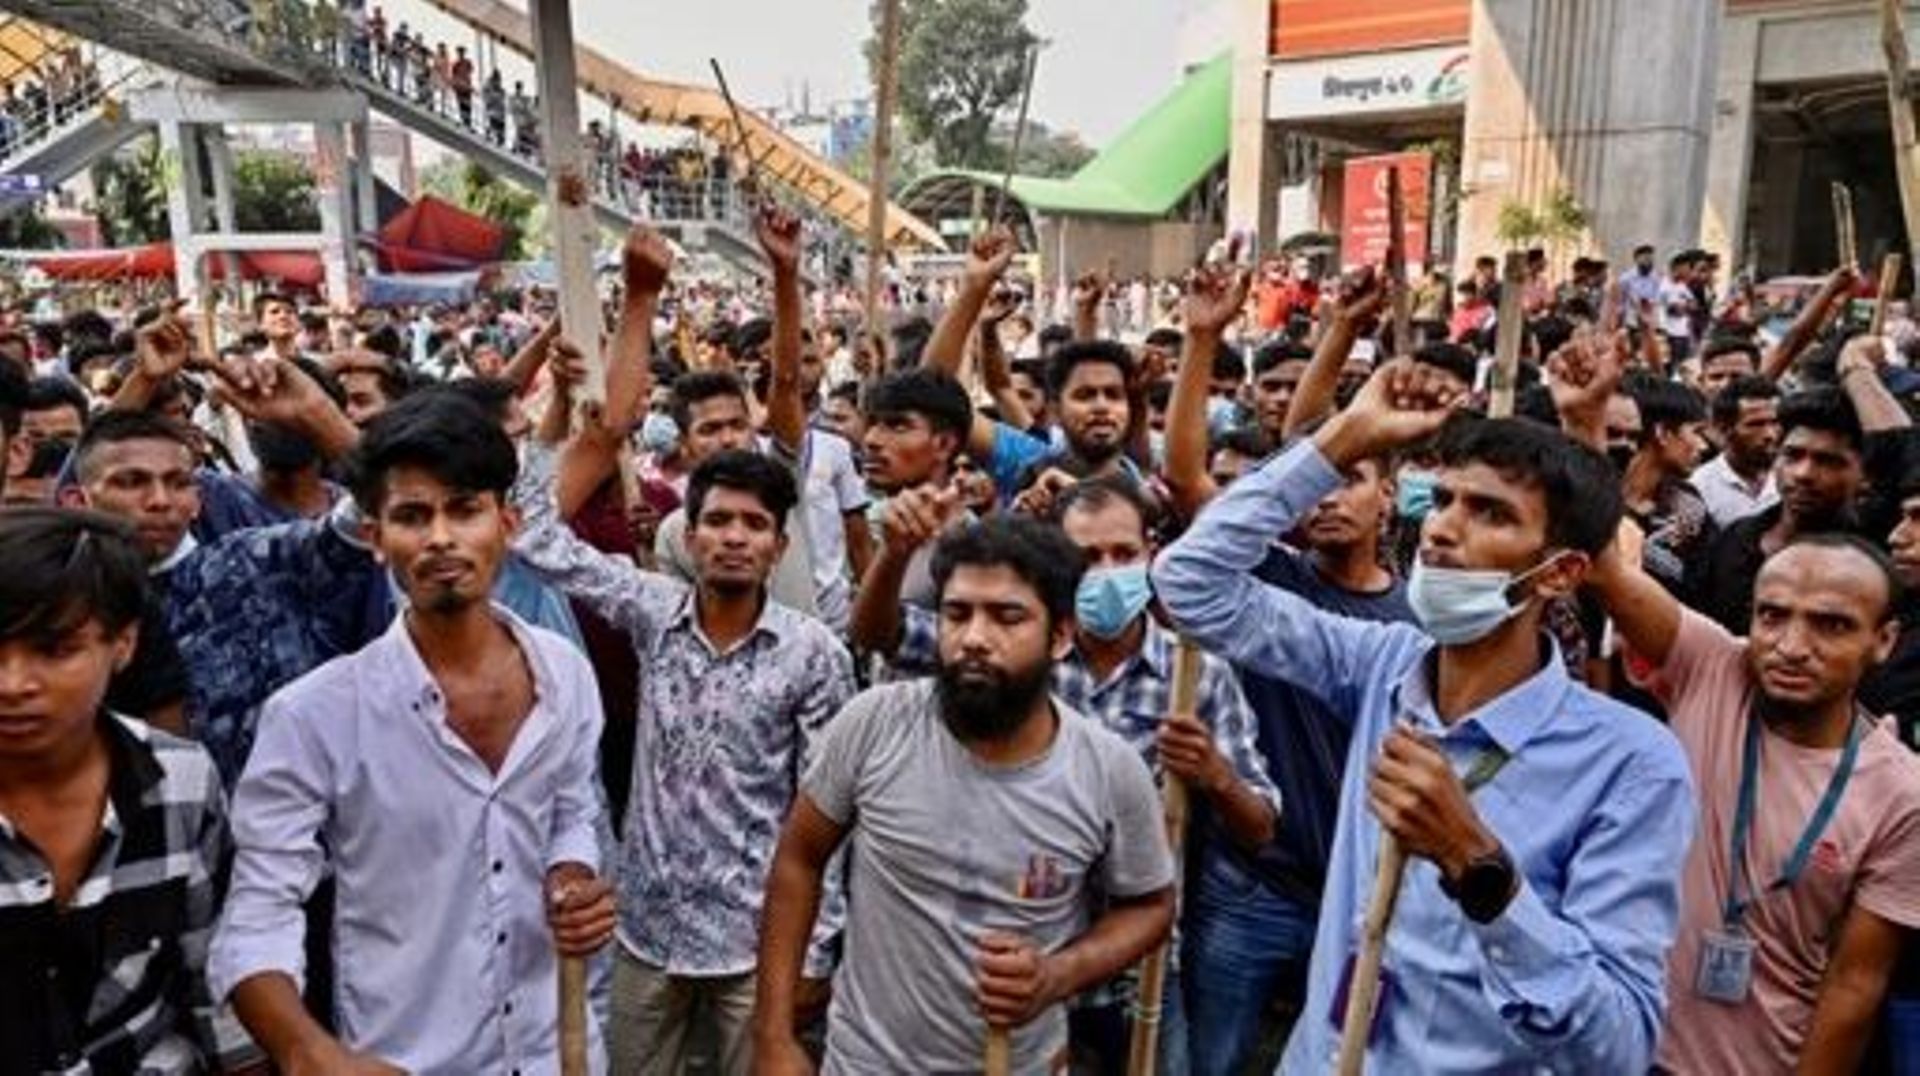 Garment workers block roads as they take part in a protest in Dhaka on November 1, 2023. Thousands of Bangladeshi garment workers barricaded roads in Dhaka Wednesday demanding fair wages for clothing they make for major Western brands, with at least two k